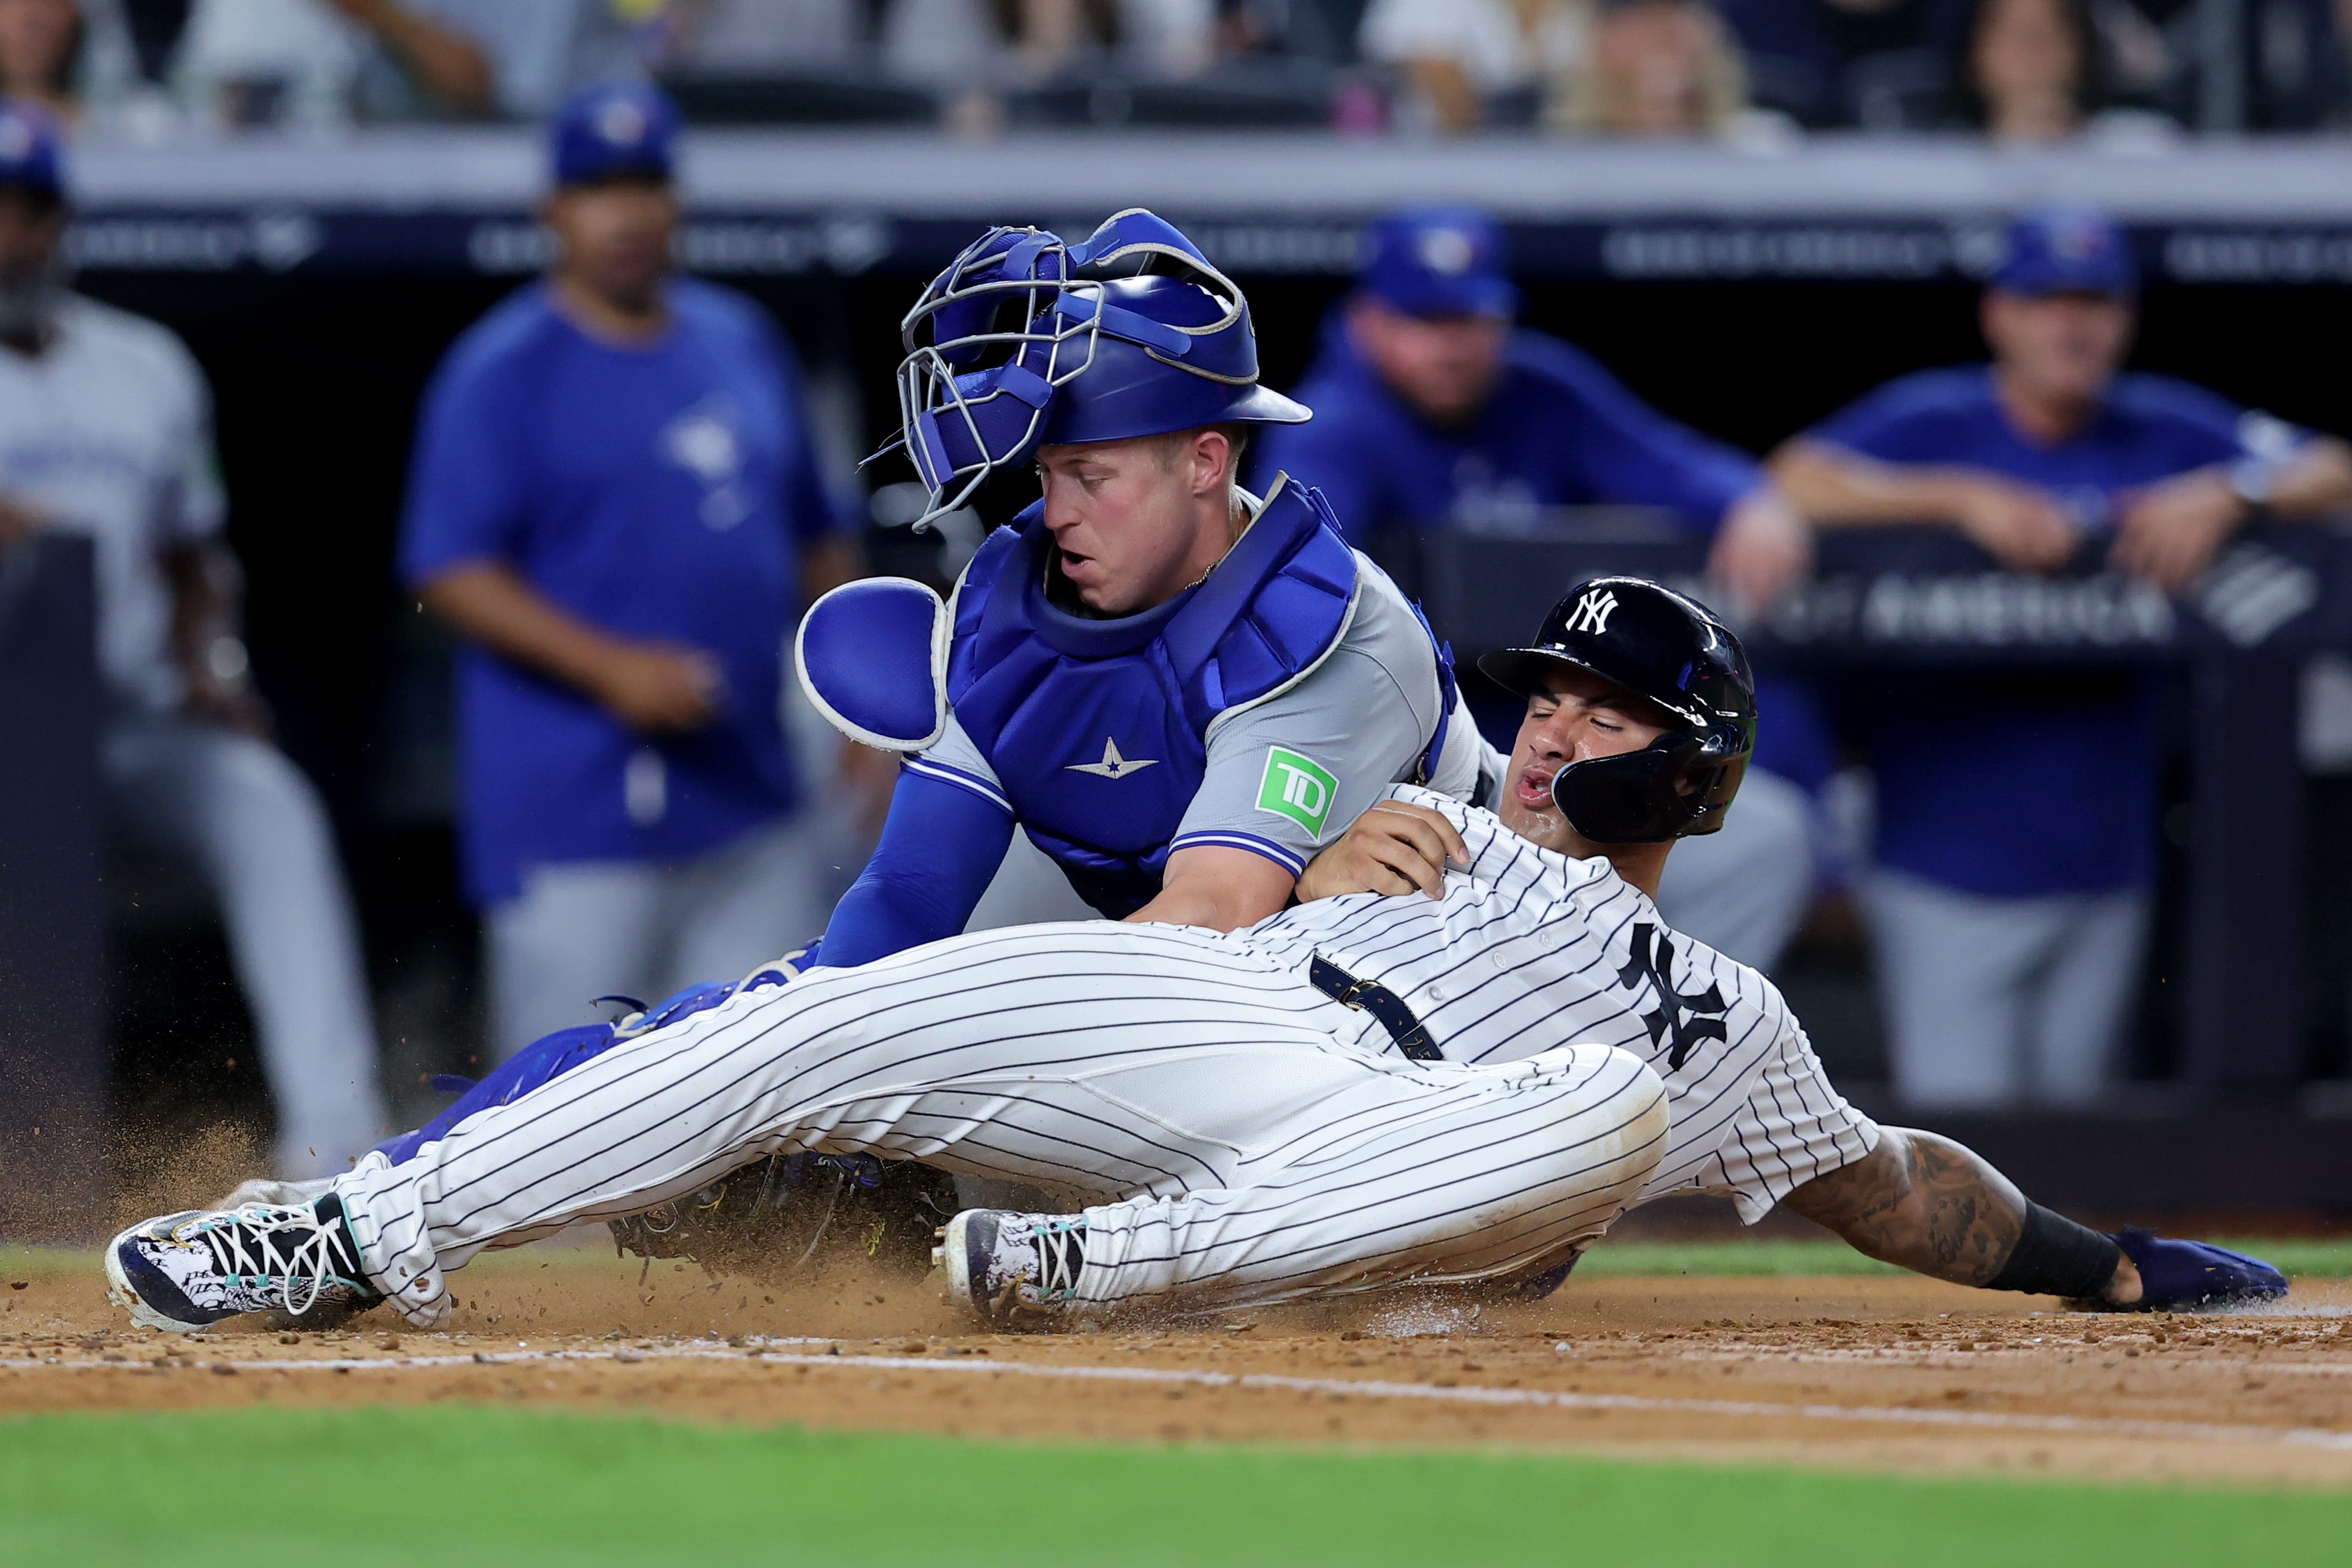 Gleyber Torres benched by Yankees' manager Aaron Boone for lack of hustle